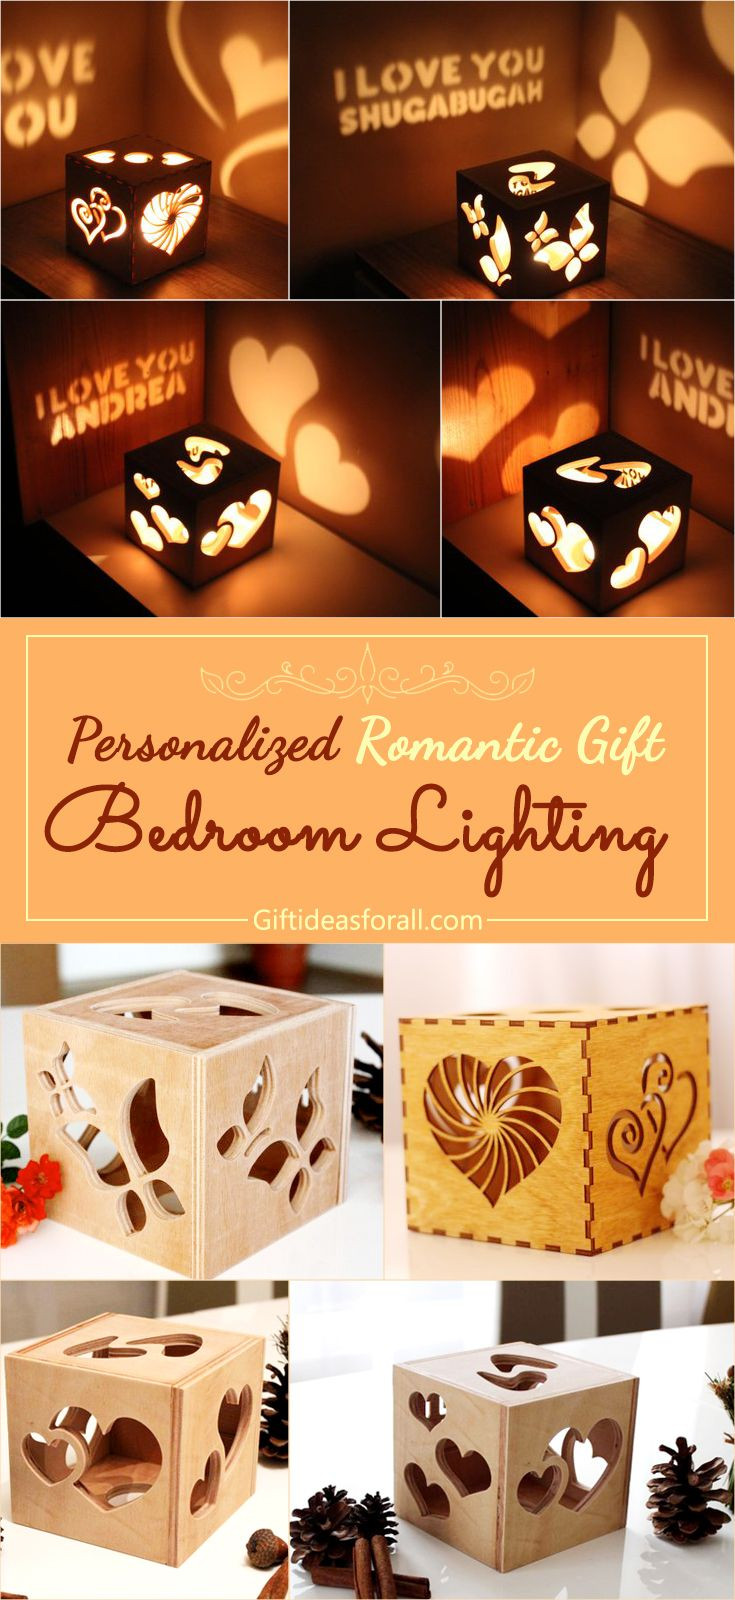 Unique Gift Ideas Girlfriend
 Personalized romantic bedroom lighting Gifts Giftideas